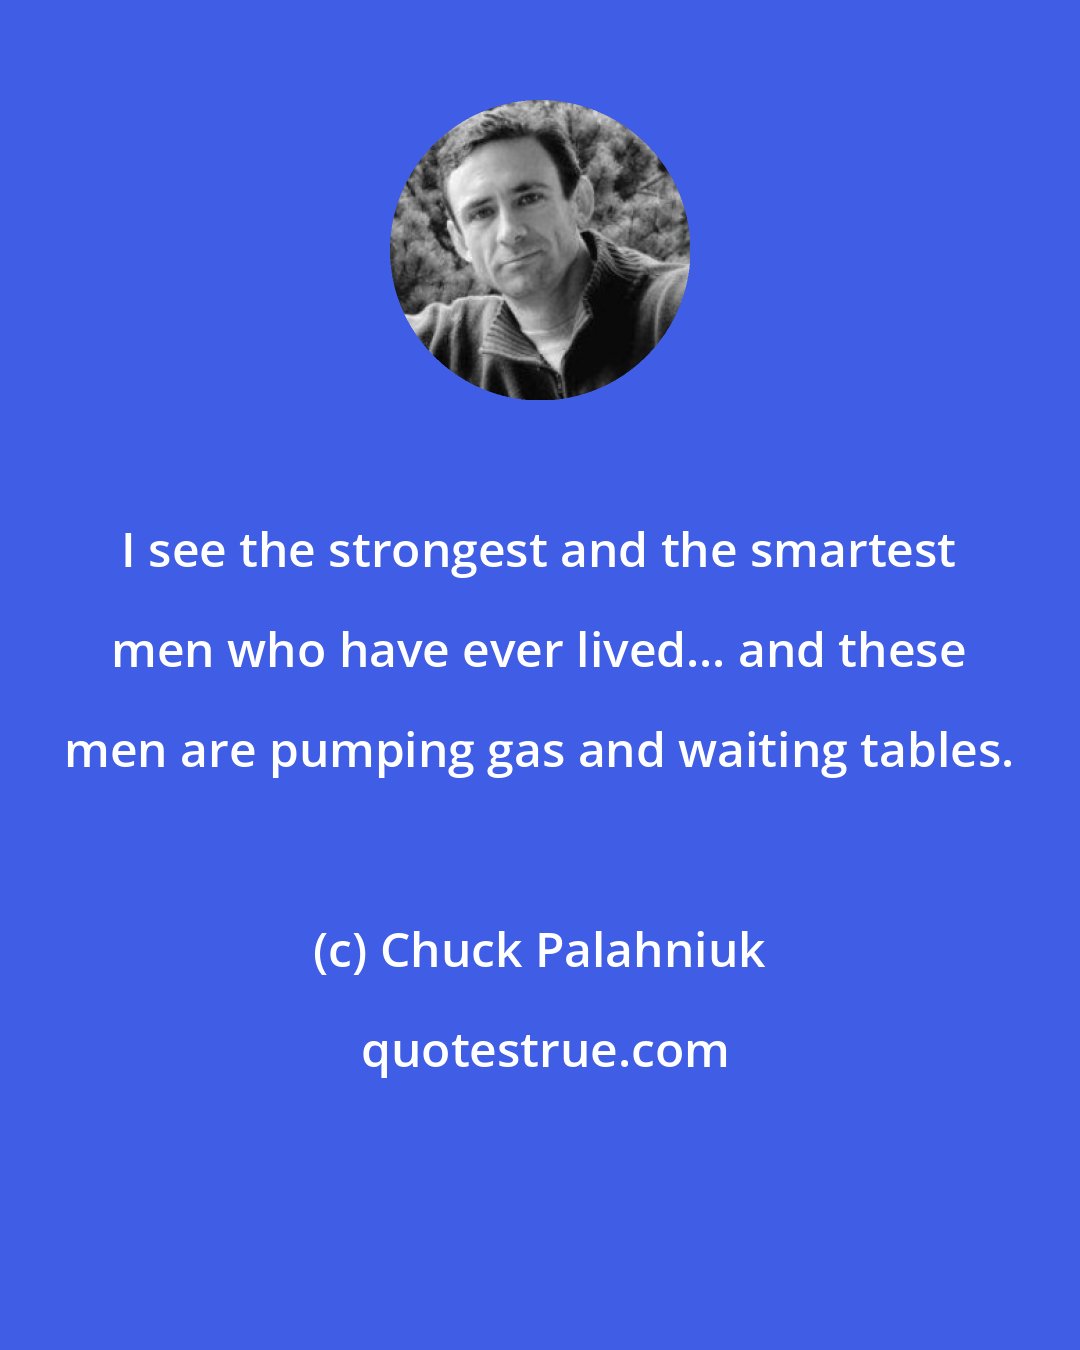 Chuck Palahniuk: I see the strongest and the smartest men who have ever lived... and these men are pumping gas and waiting tables.